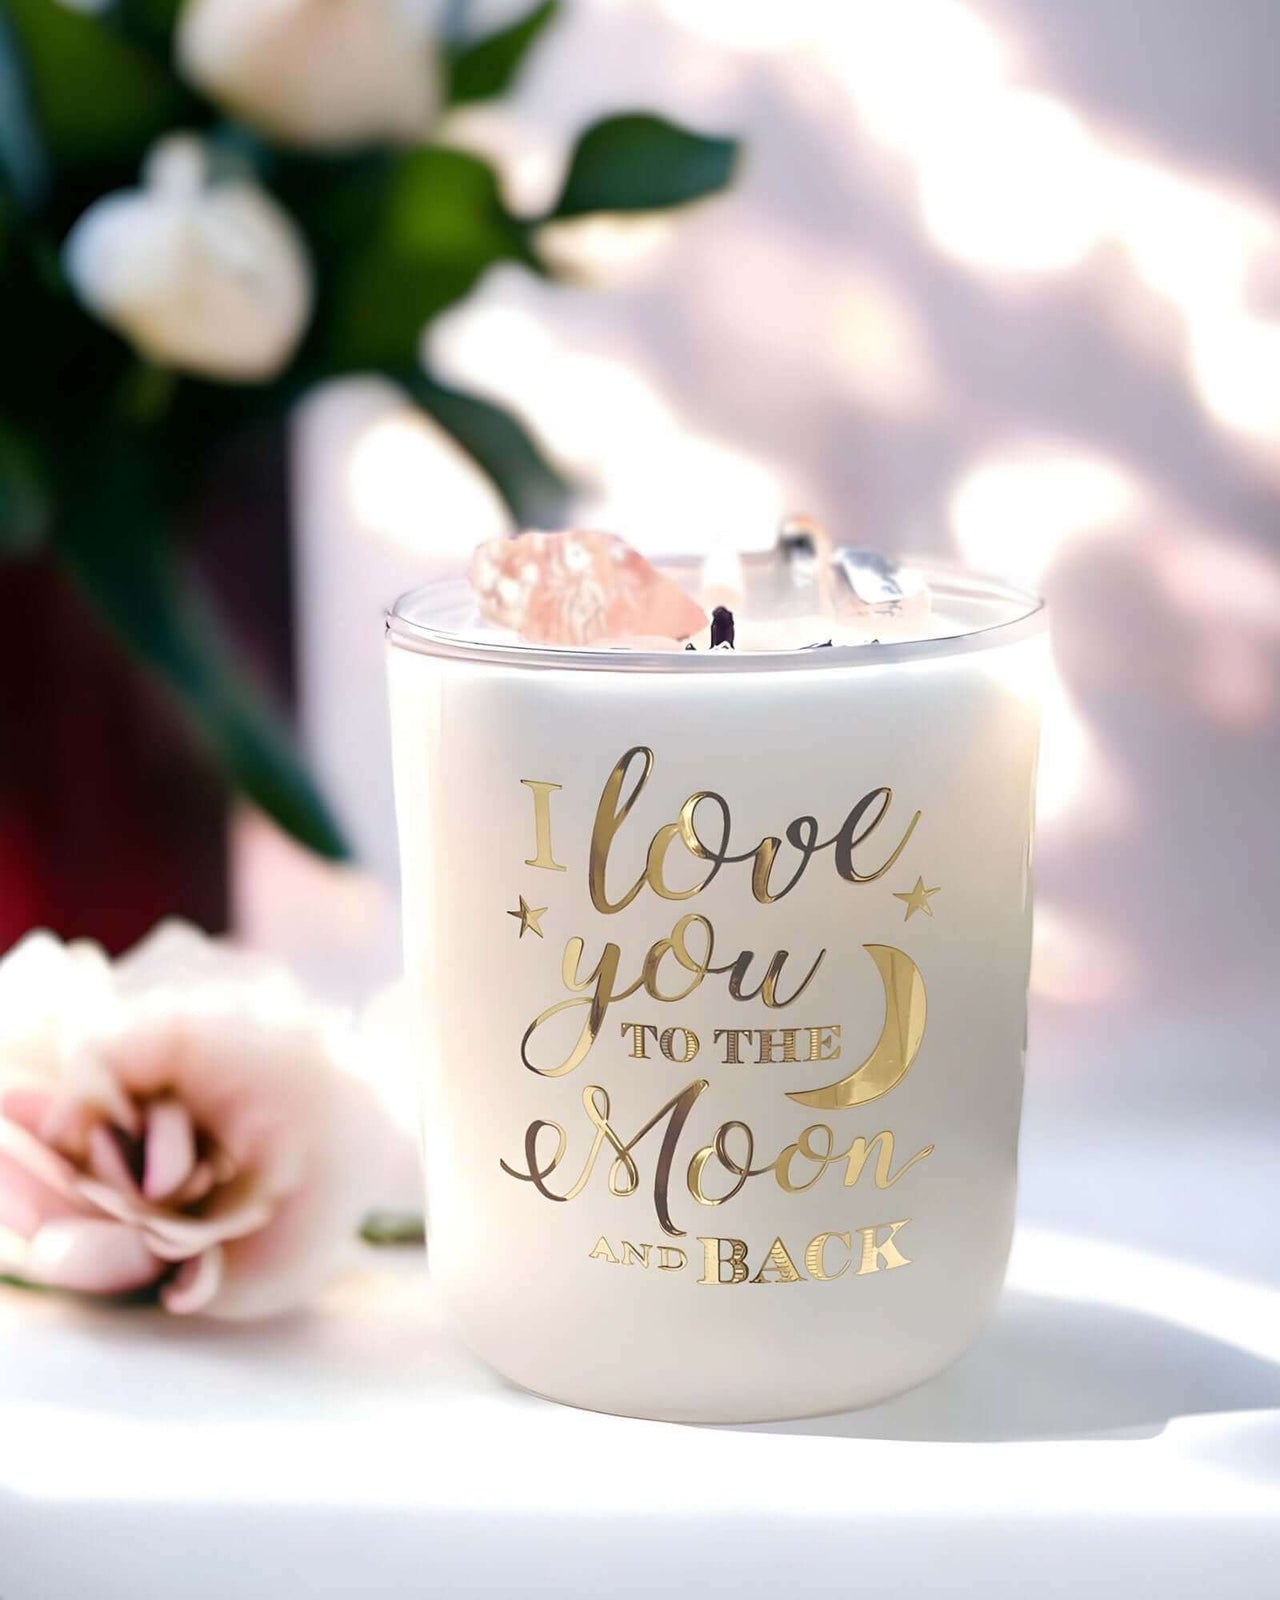 I I Love you to the Moon and Back - Rose Quartz Crystal Candle - A$49 Enchanting Aromas